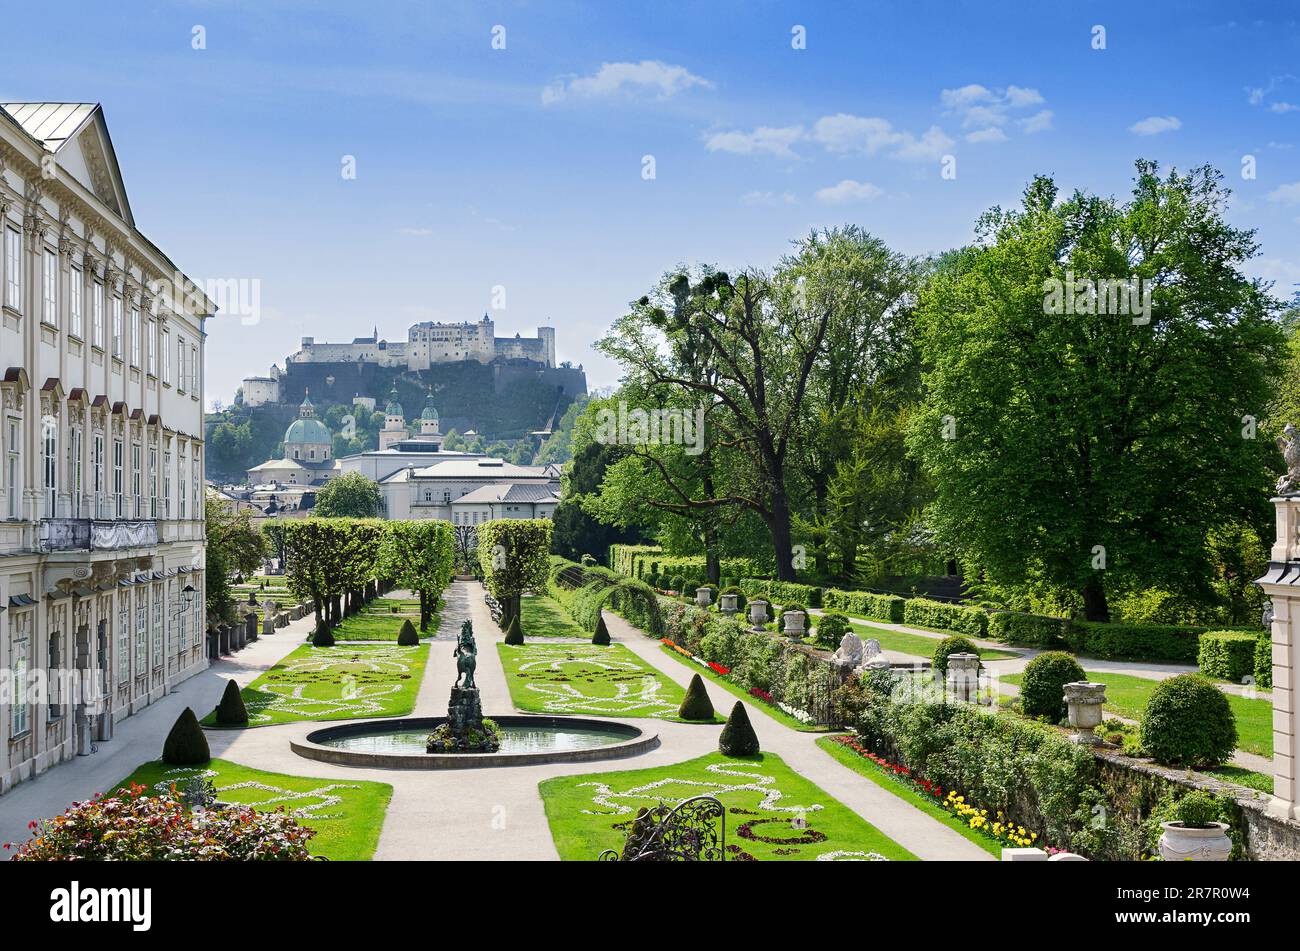 Salzburg city in Austria, historic center with Baroque Mirabell Palace and Garden, and with Hohensalzburg Fortress in the distance. Stock Photo